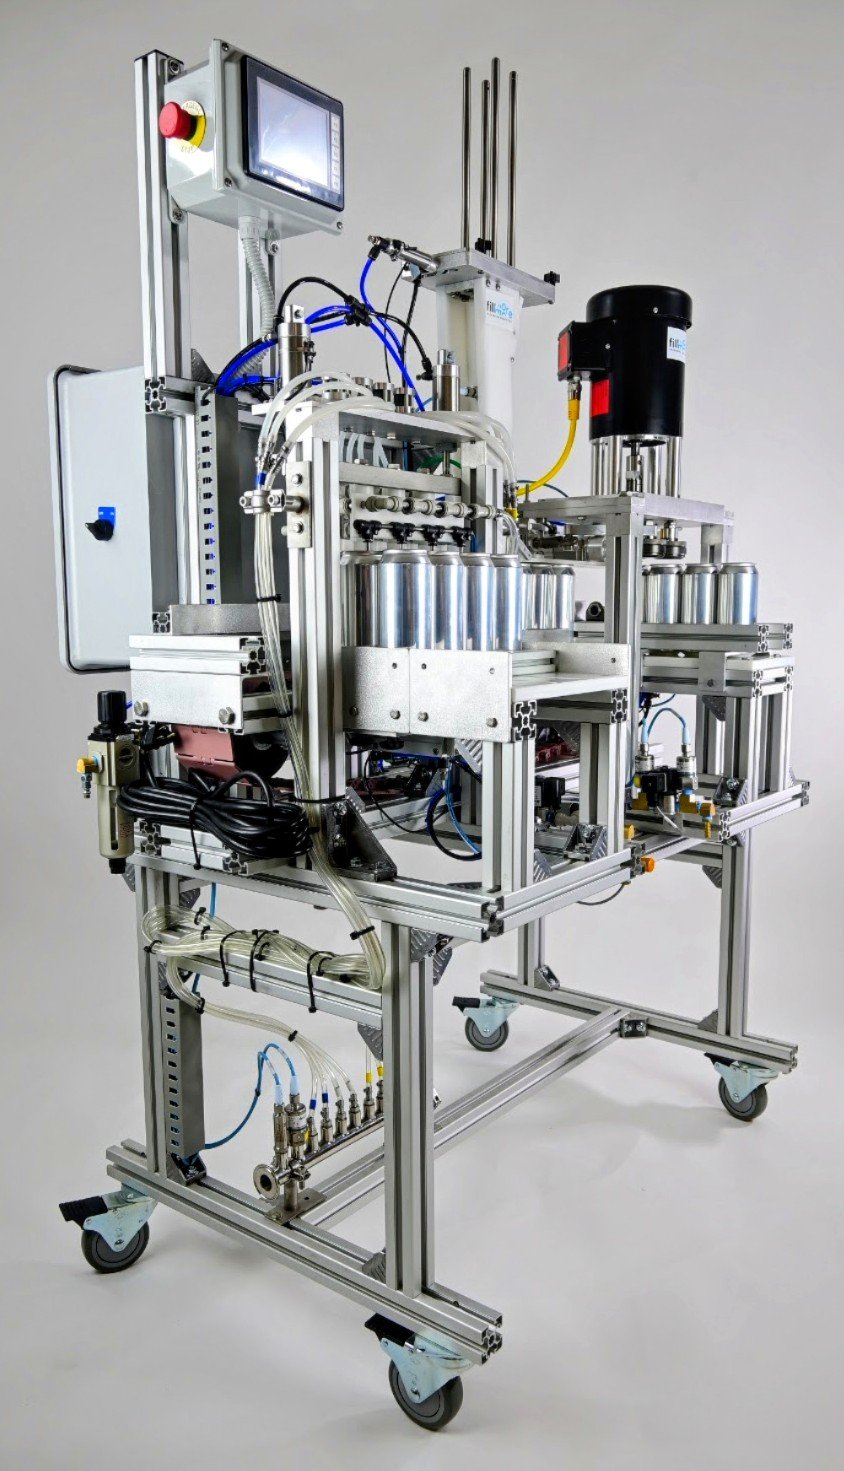 Canning Machines, Bottle Filling Machines